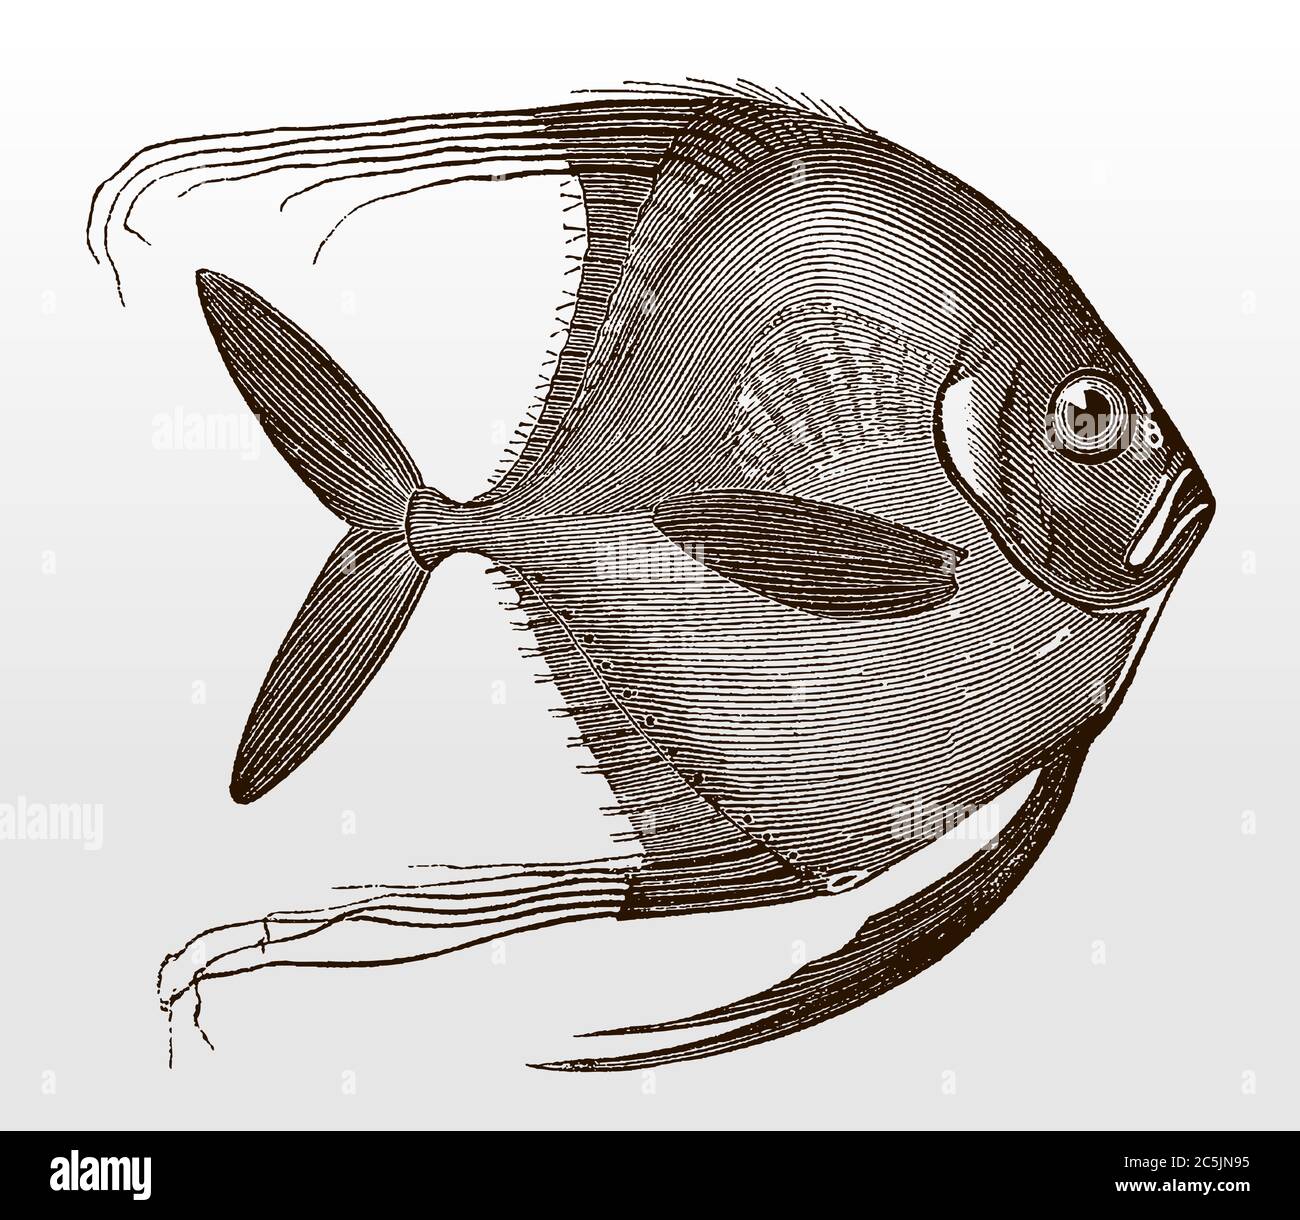 Juvenile African pompano, alectis ciliaris, a tropical marine fish in side view after an antique illustration from the 19th century Stock Vector